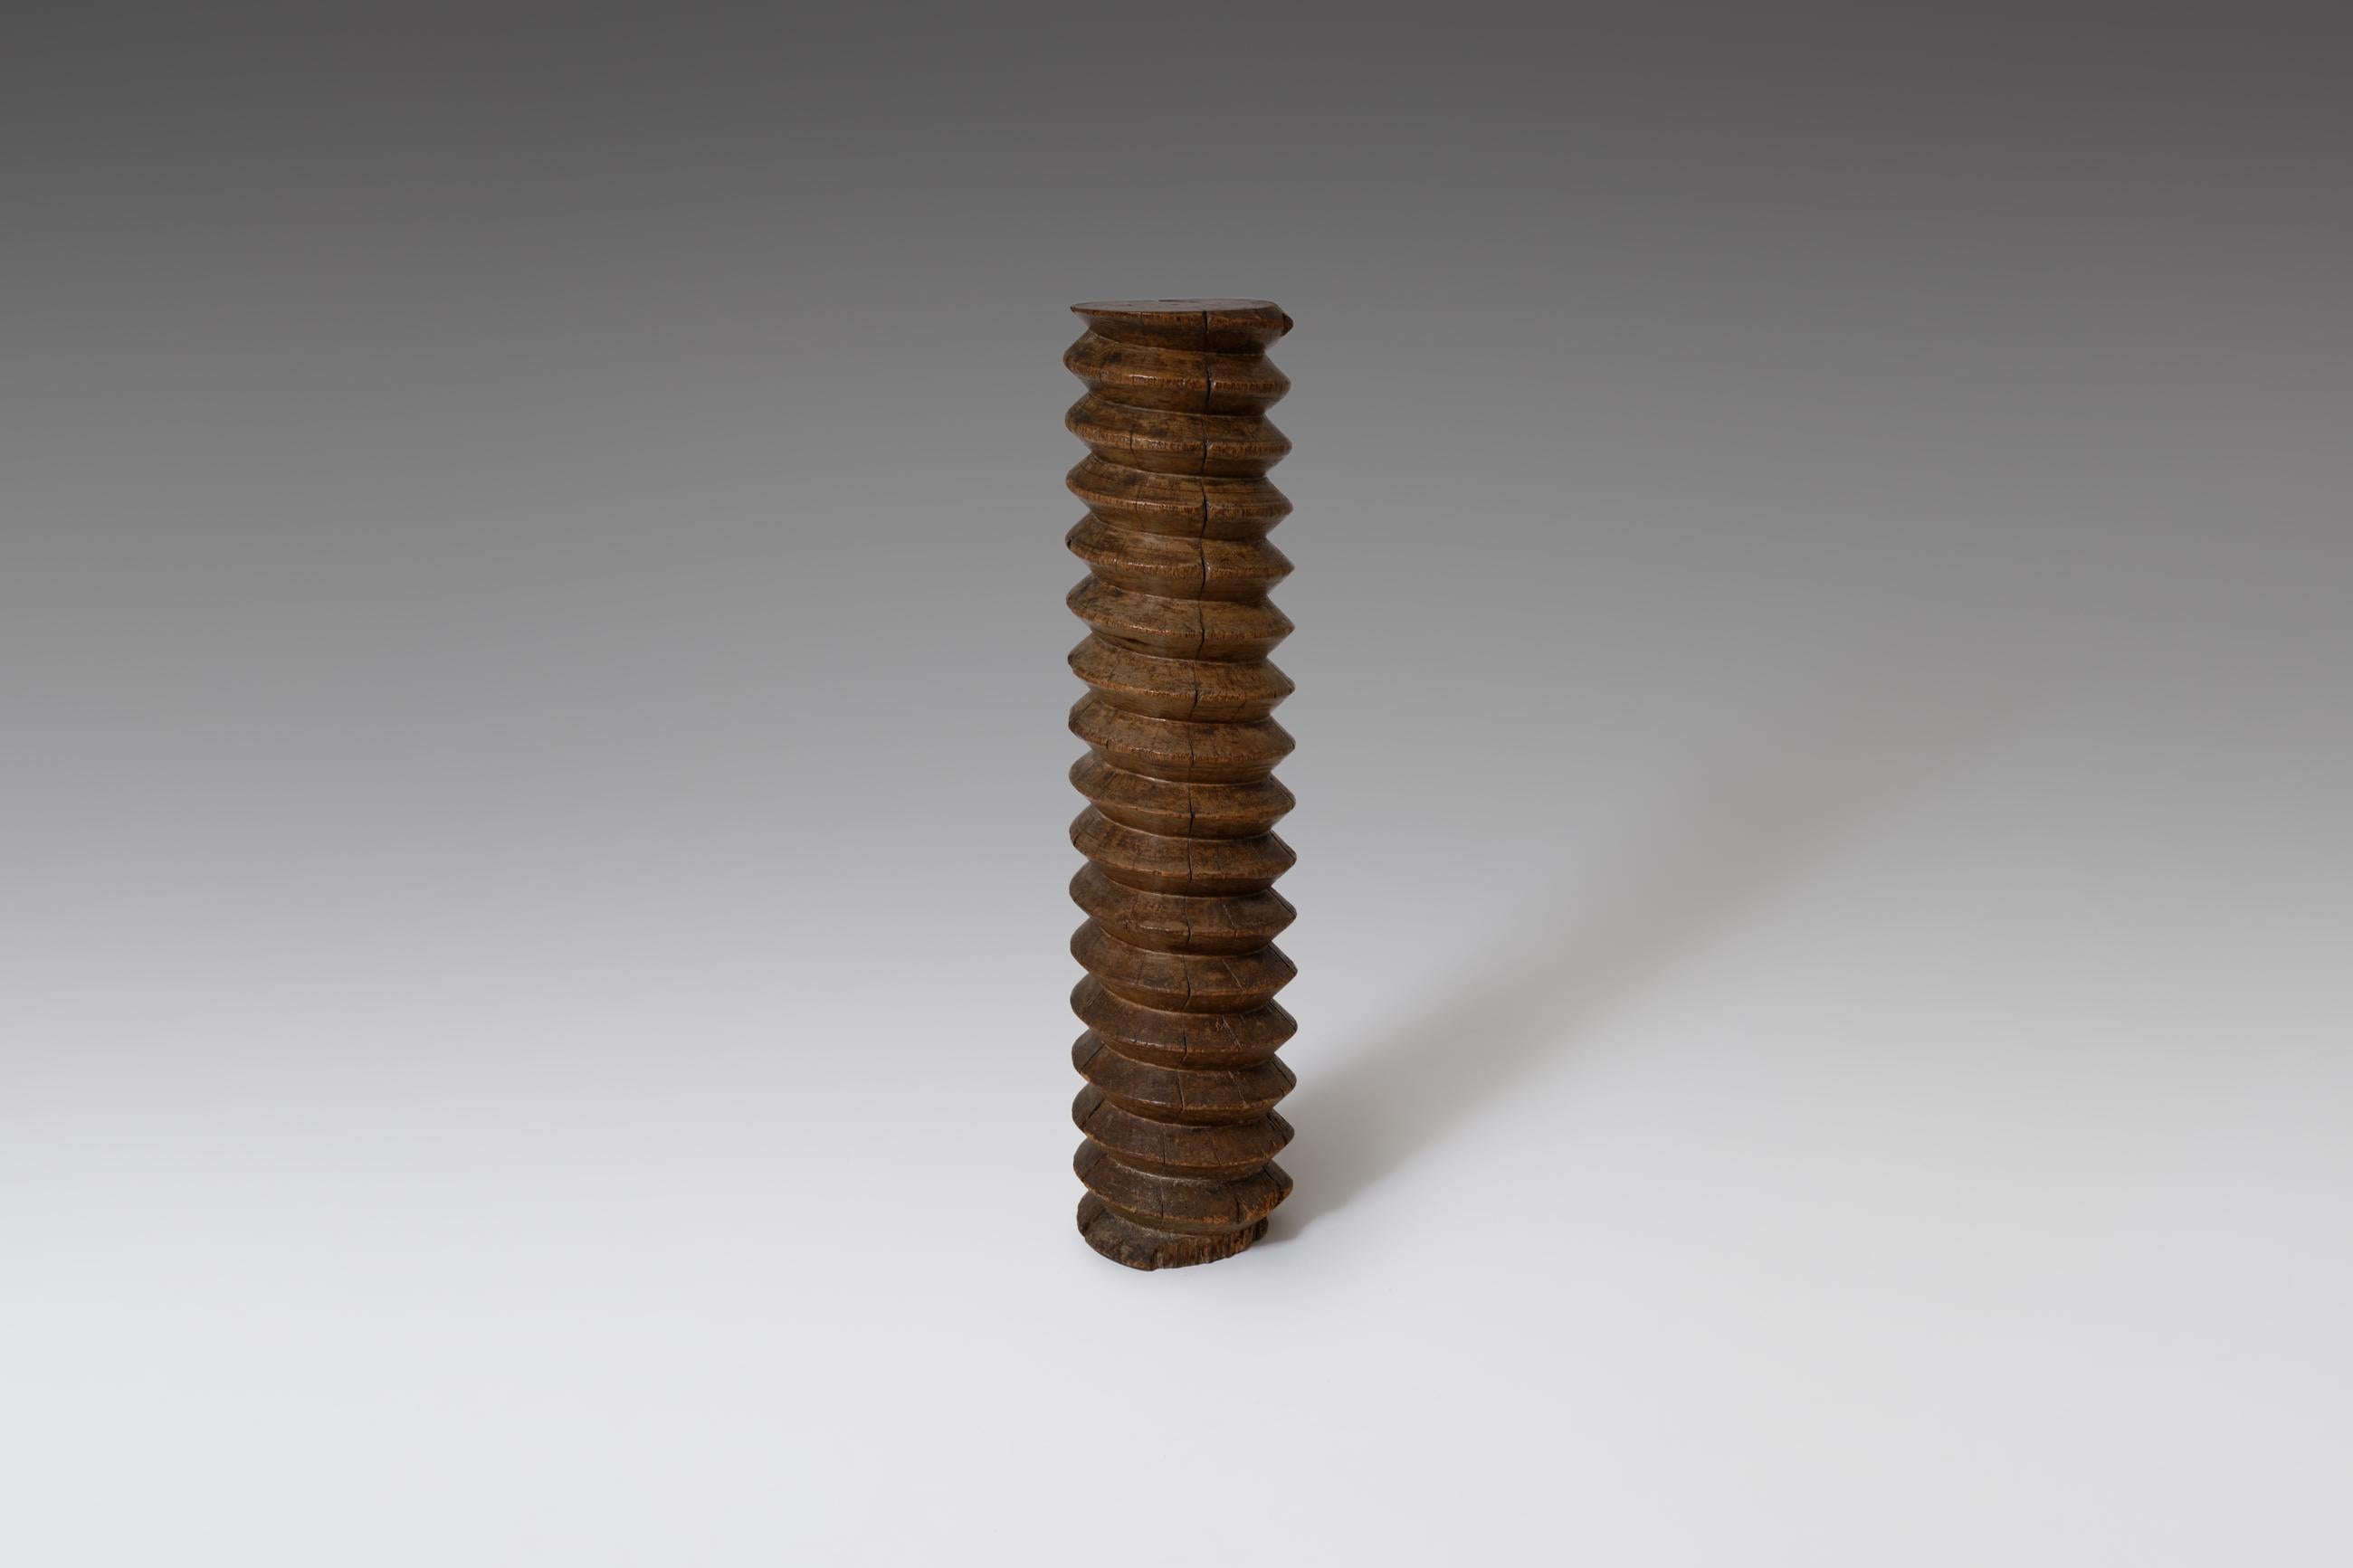 French hand carved wooden press, France, mid-19th century. The screw has been part of an old wine press and is hand carved out of solid walnut. Highly decorative object. In very good original condition with a lovely characteristic patina.